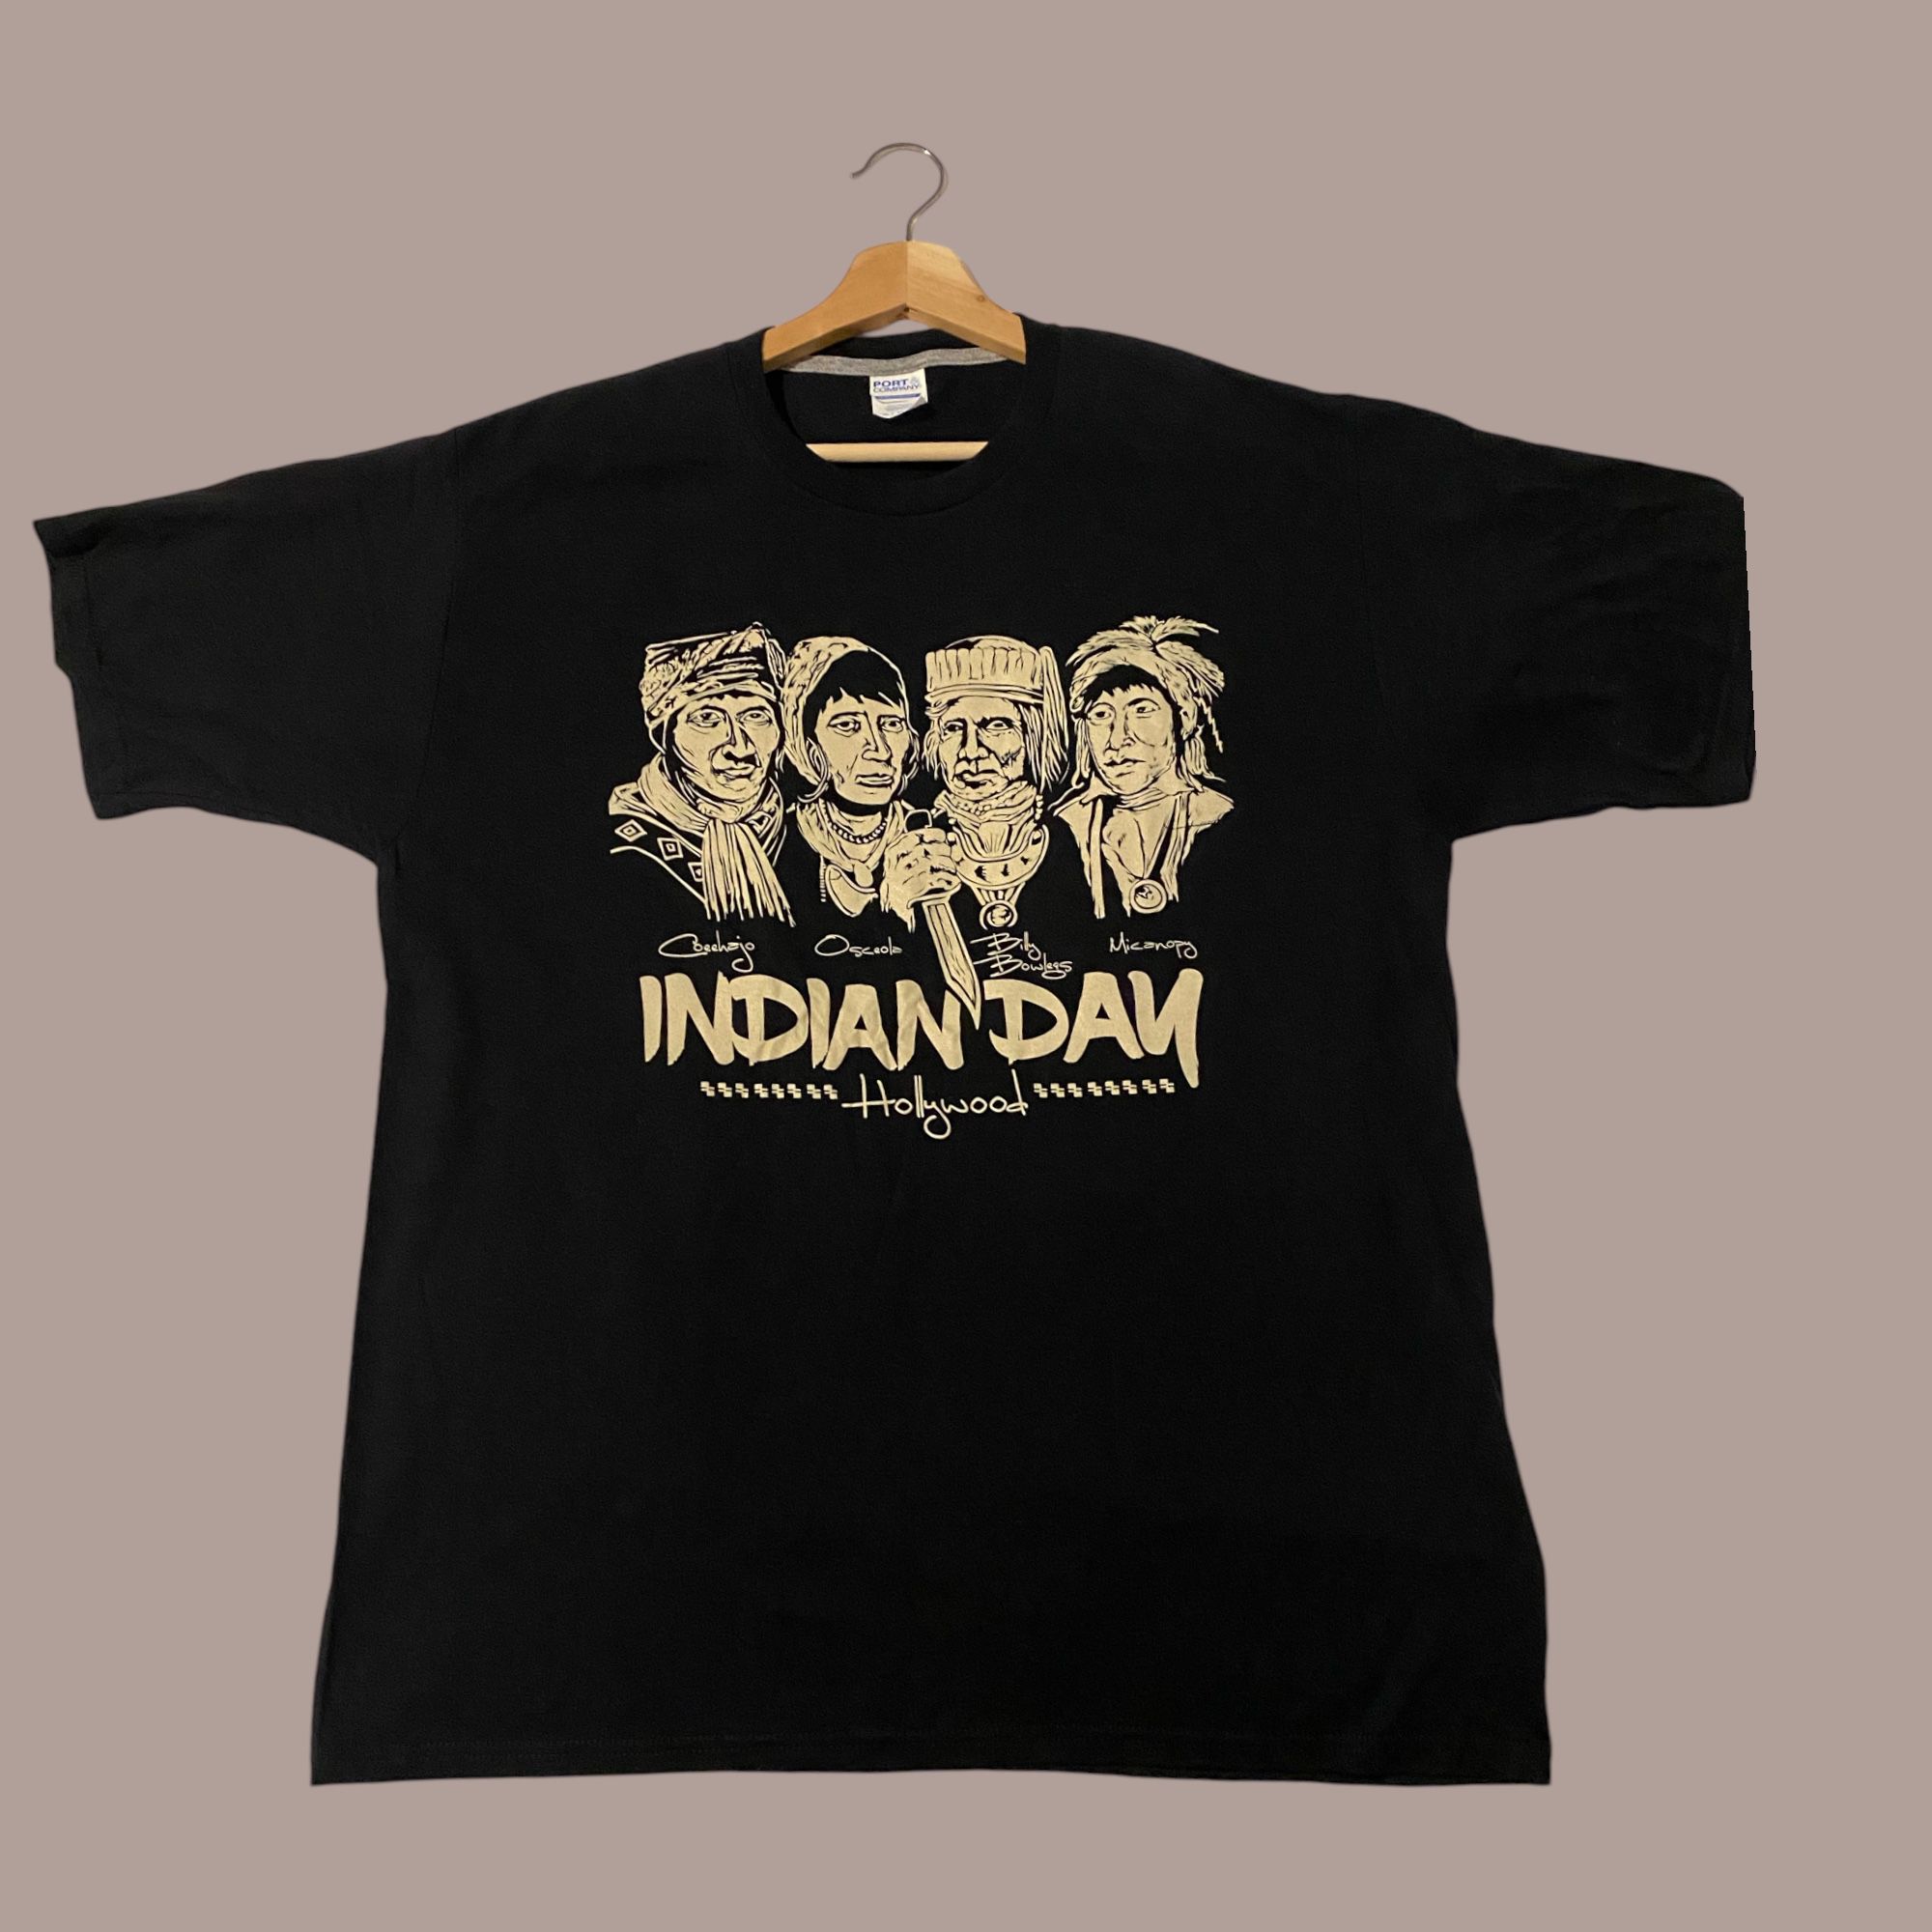 Indian Day T-shirt Very Rare Size XL